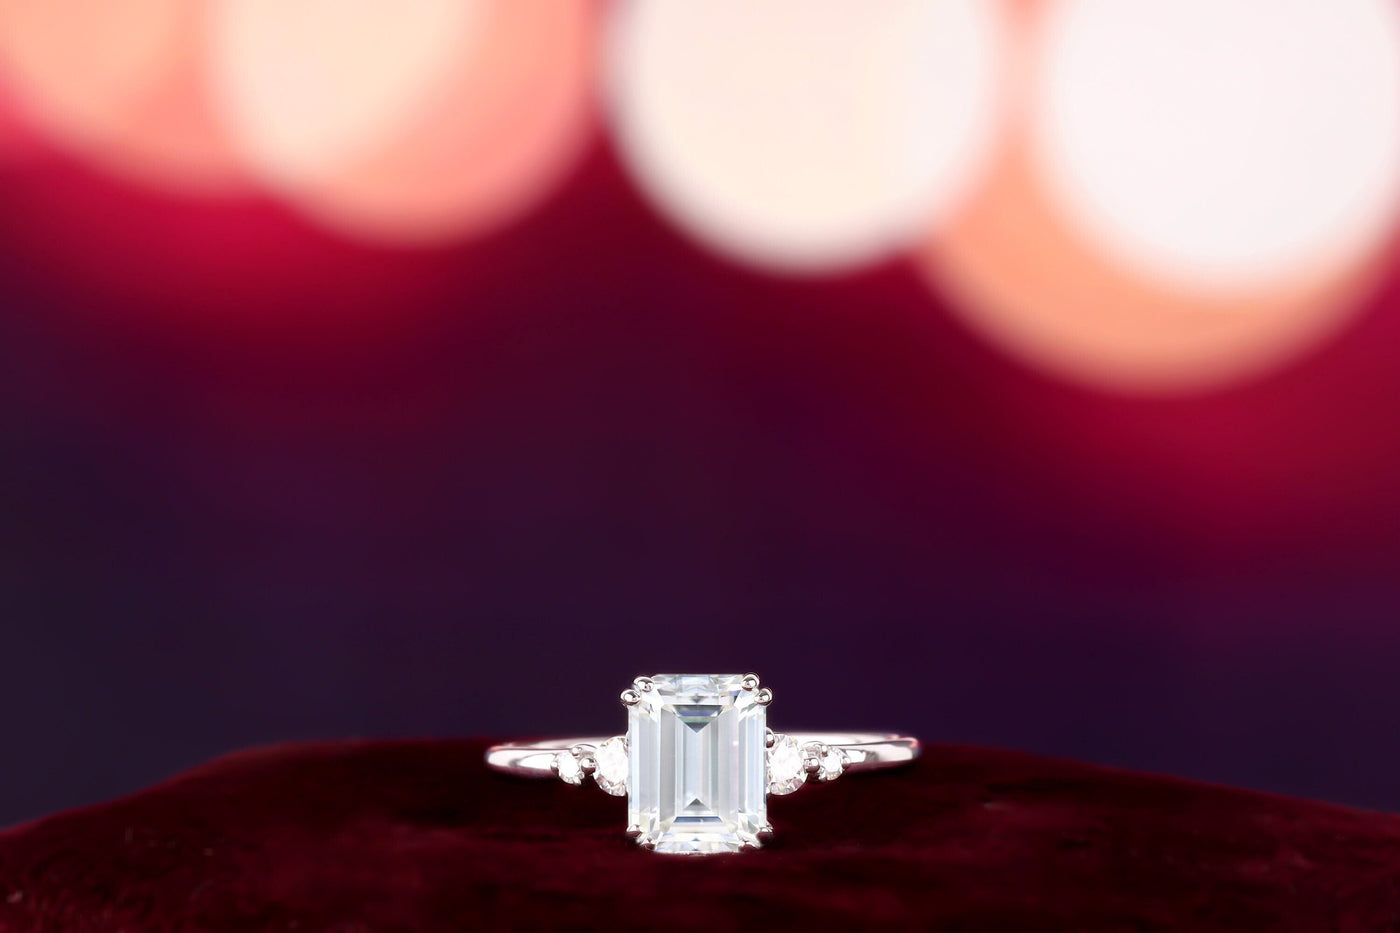 2.50 CT Emerald Cut Moissanite Engagement Ring, Solid 14K/18K White Gold Ring, Five Stone Solitaire Wedding Ring, HandMade Jewelry For Her